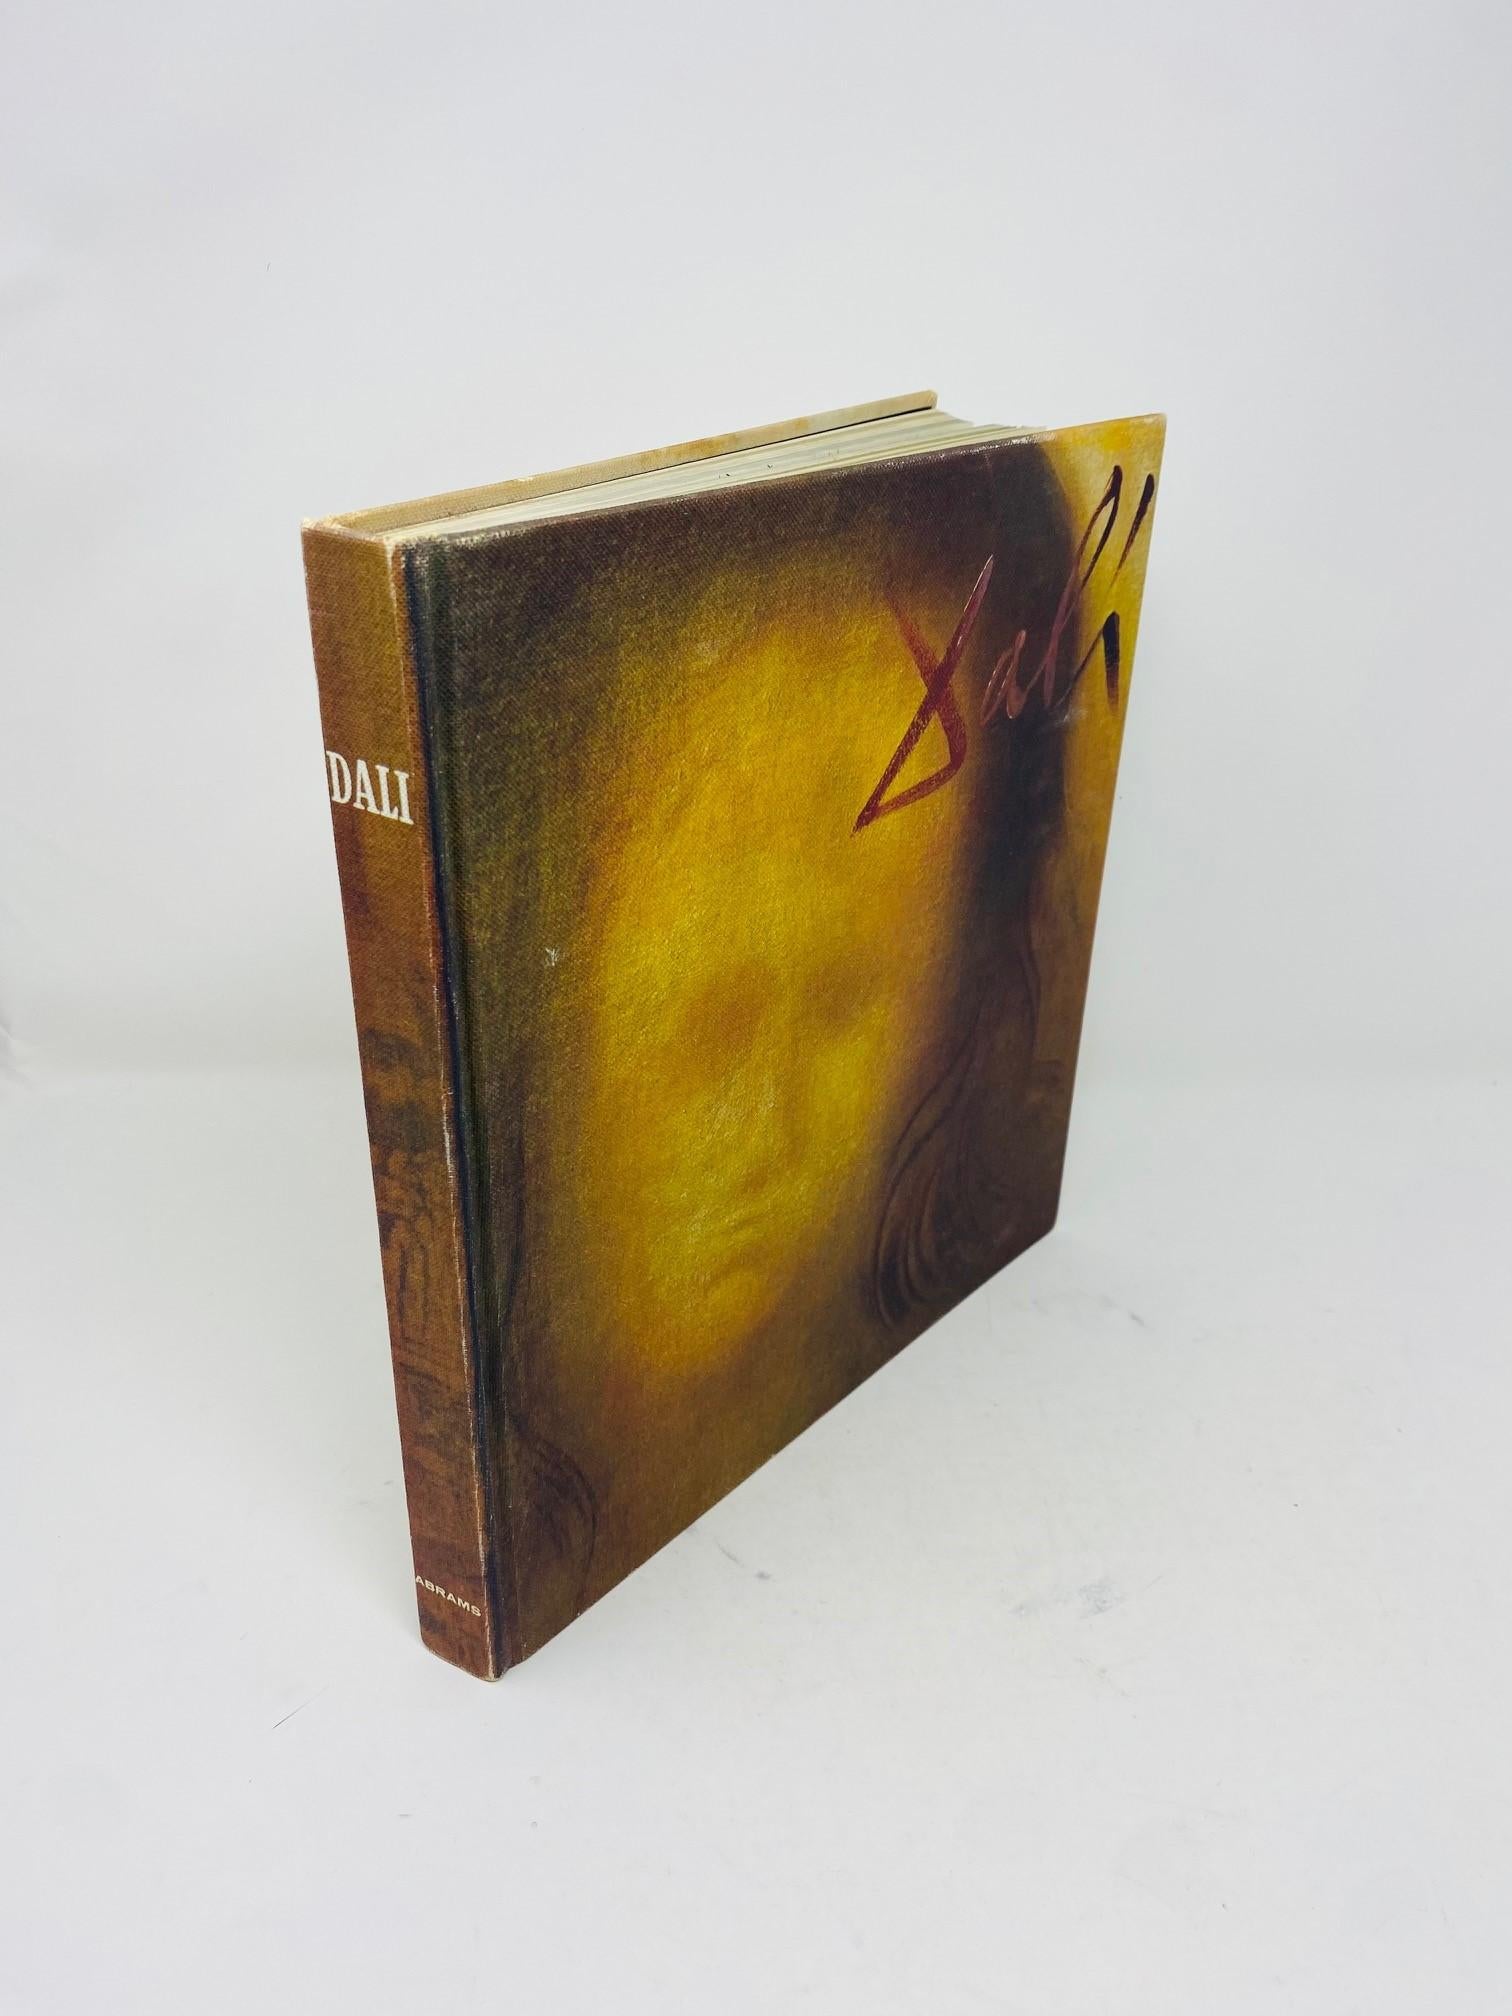 French Vintage 1968 Edition Dali de Draeger by Max Gerard Book Art Table Book For Sale